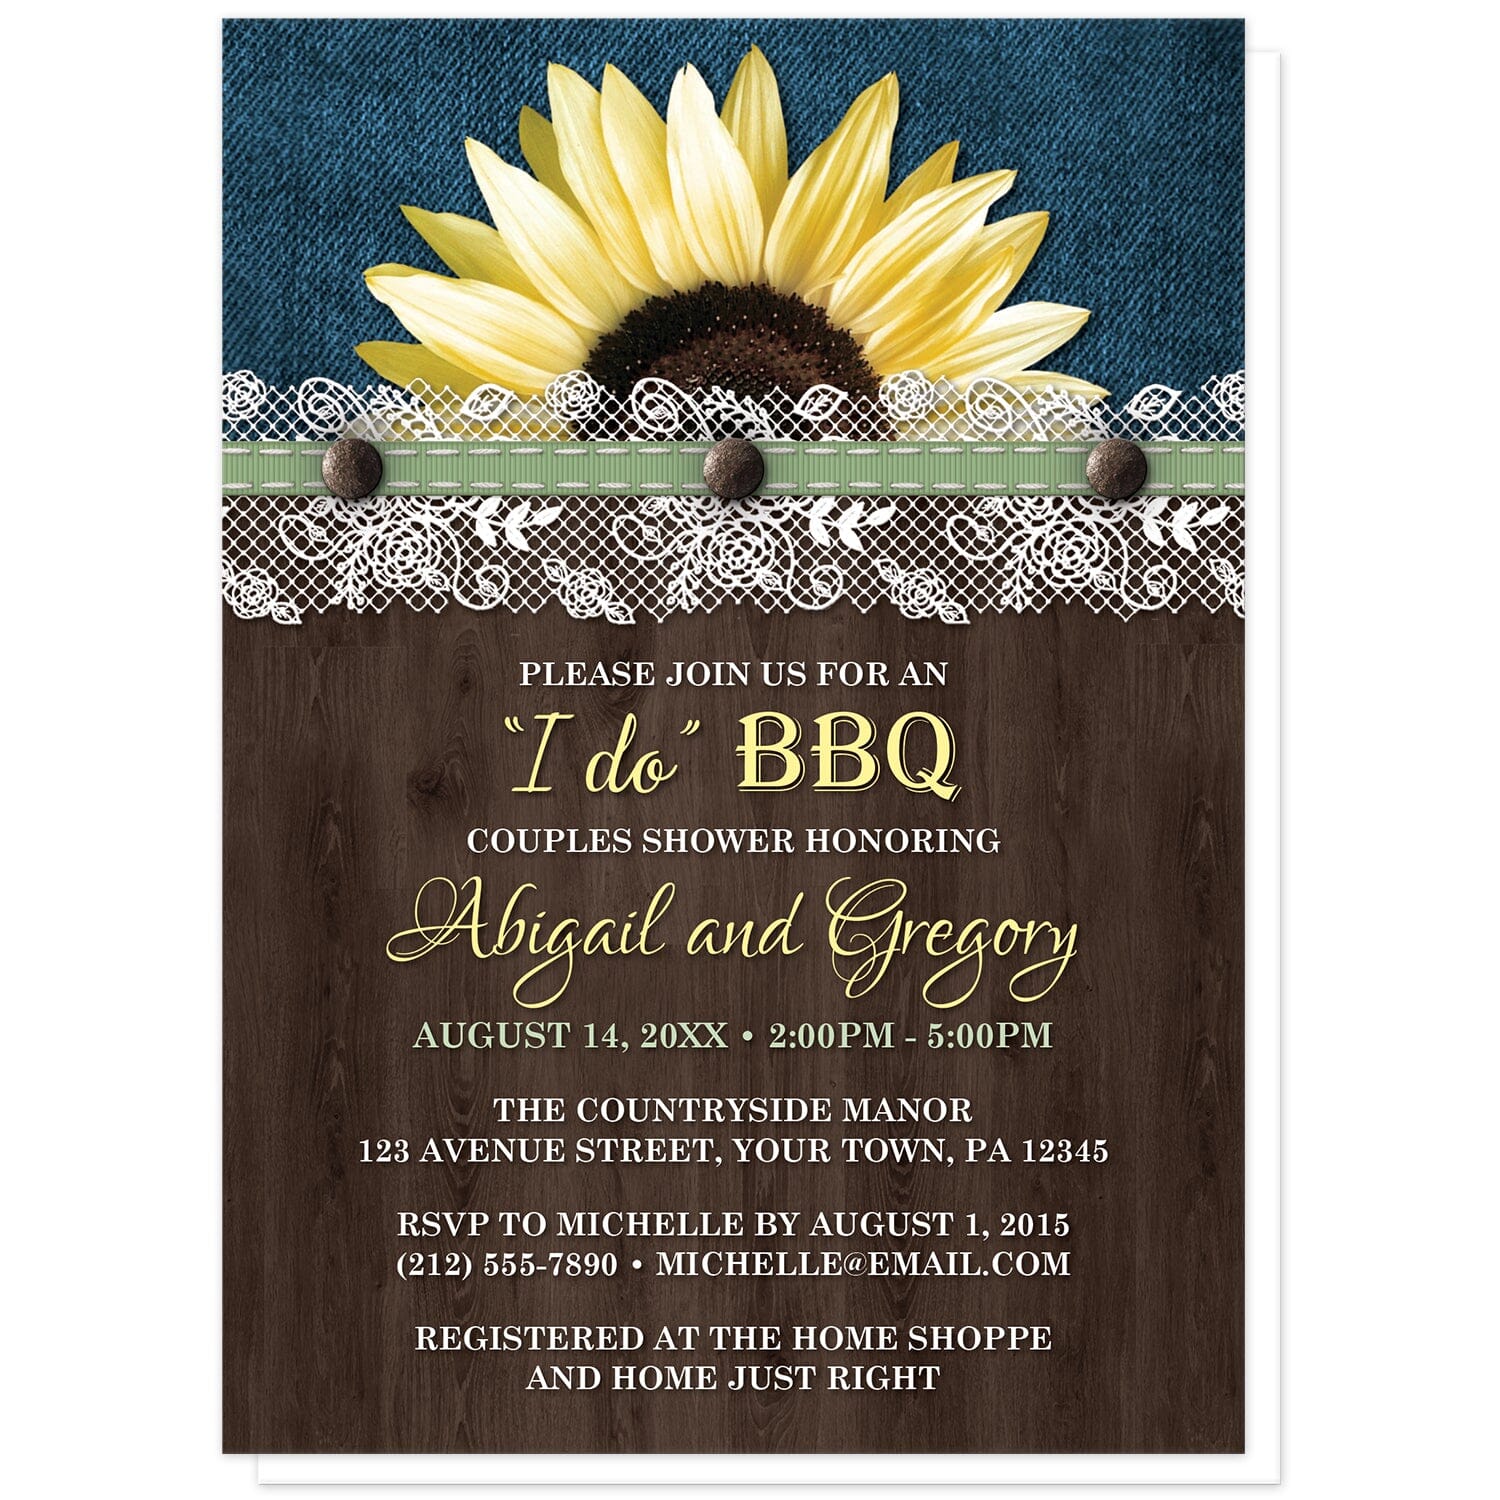 Sunflower Denim Wood Lace I Do BBQ Couples Shower Invitations at Artistically Invited. Rustic sunflower denim wood lace 'I Do' BBQ couples shower invitations with a vibrant yellow sunflower with a white lace and green ribbon illustration over blue denim along the top. Your personalized couples shower celebration details are custom printed in yellow, green, and white over a dark brown wood background below the sunflower. 